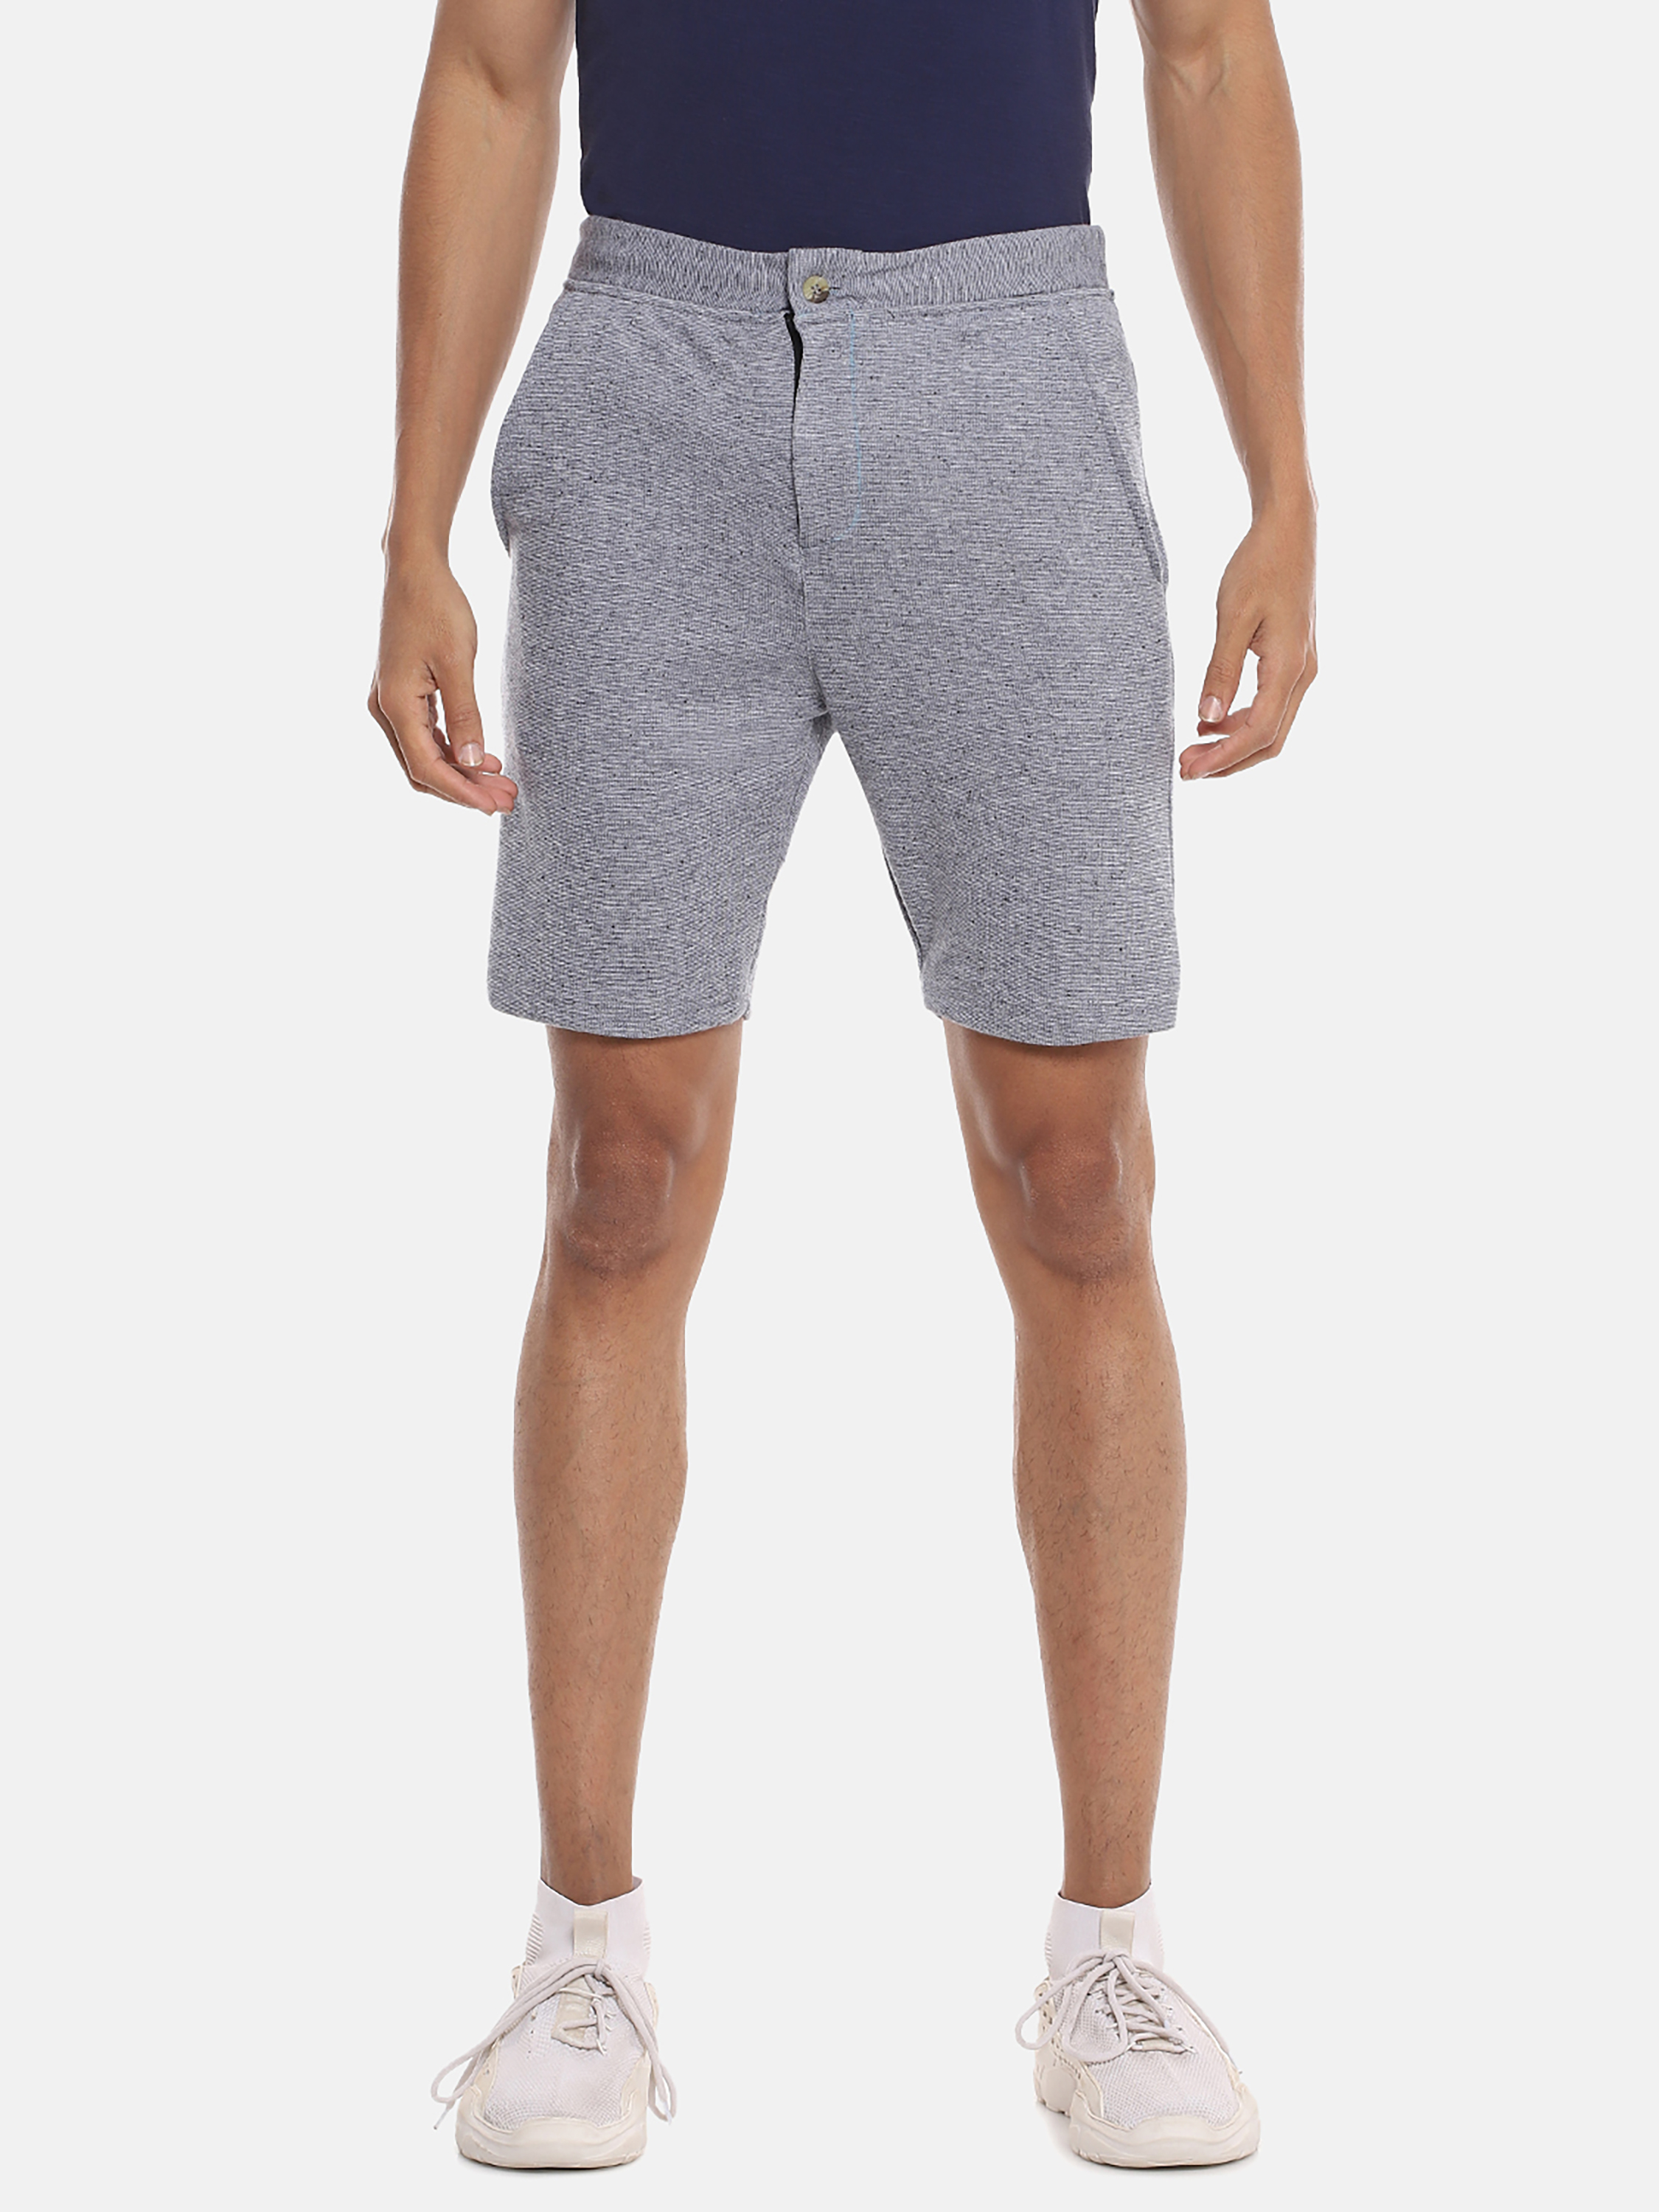 Campus Sutra Men Solid Stylish Sports & Evening Shorts